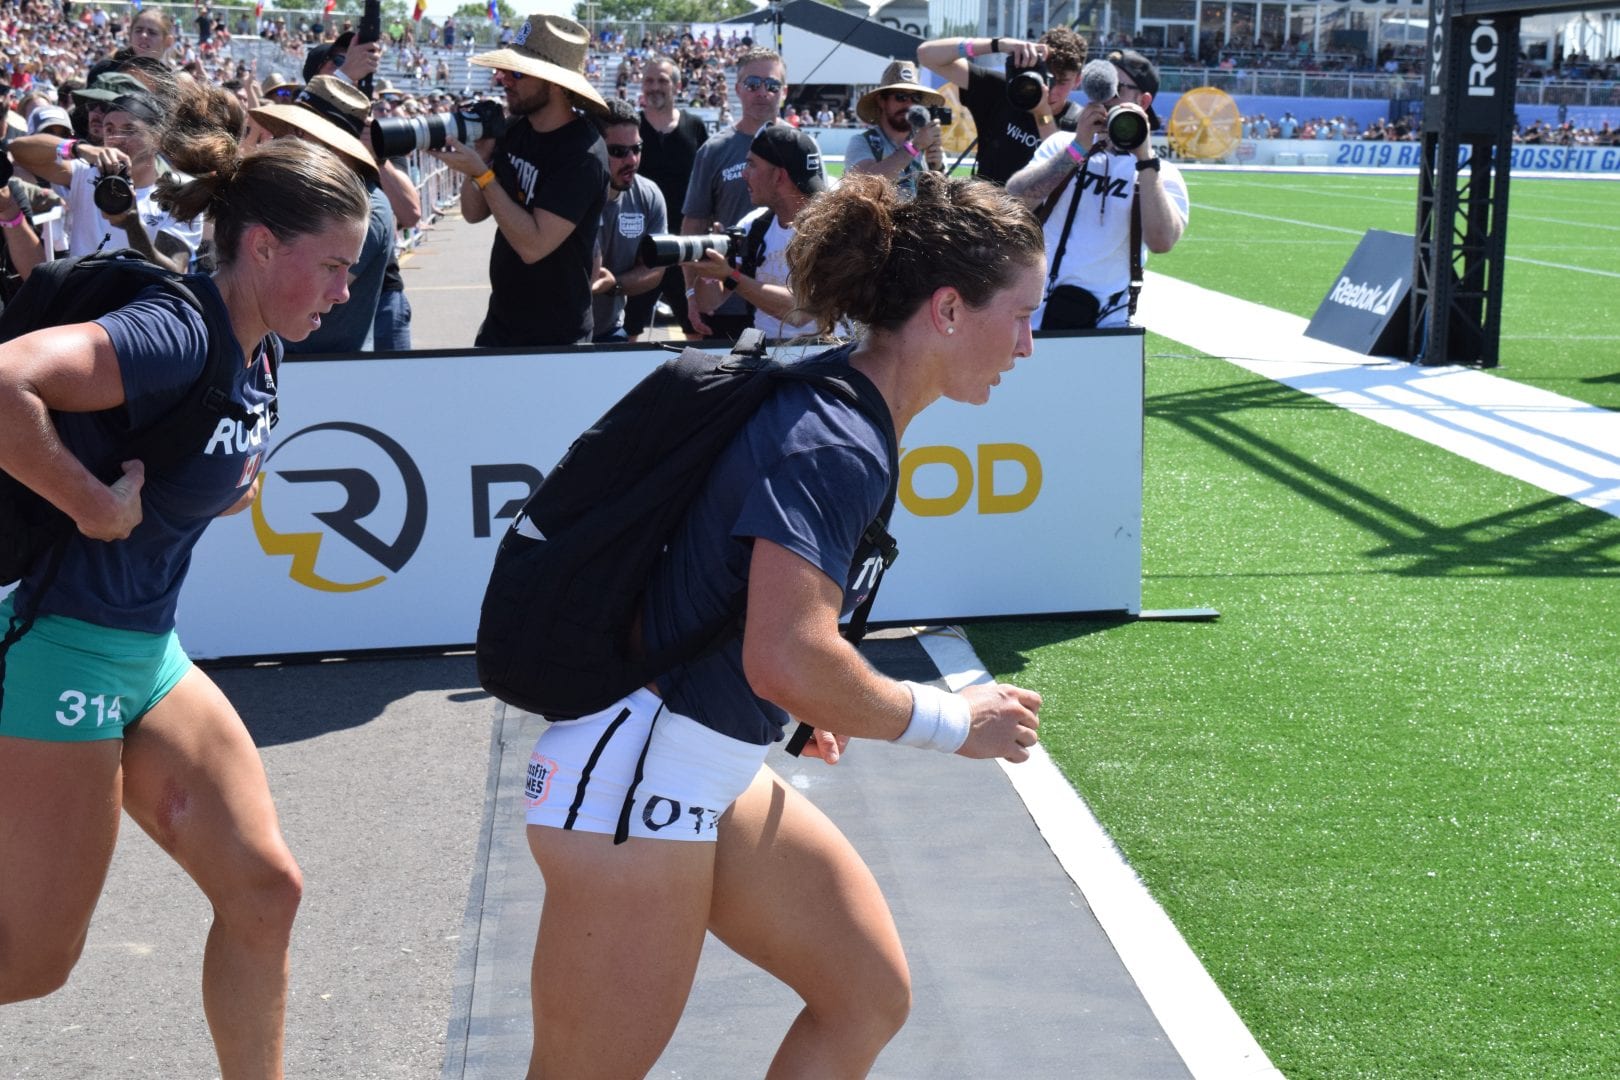 Emily Rolfe completes the Ruck Run event at the 2019 CrossFit Games